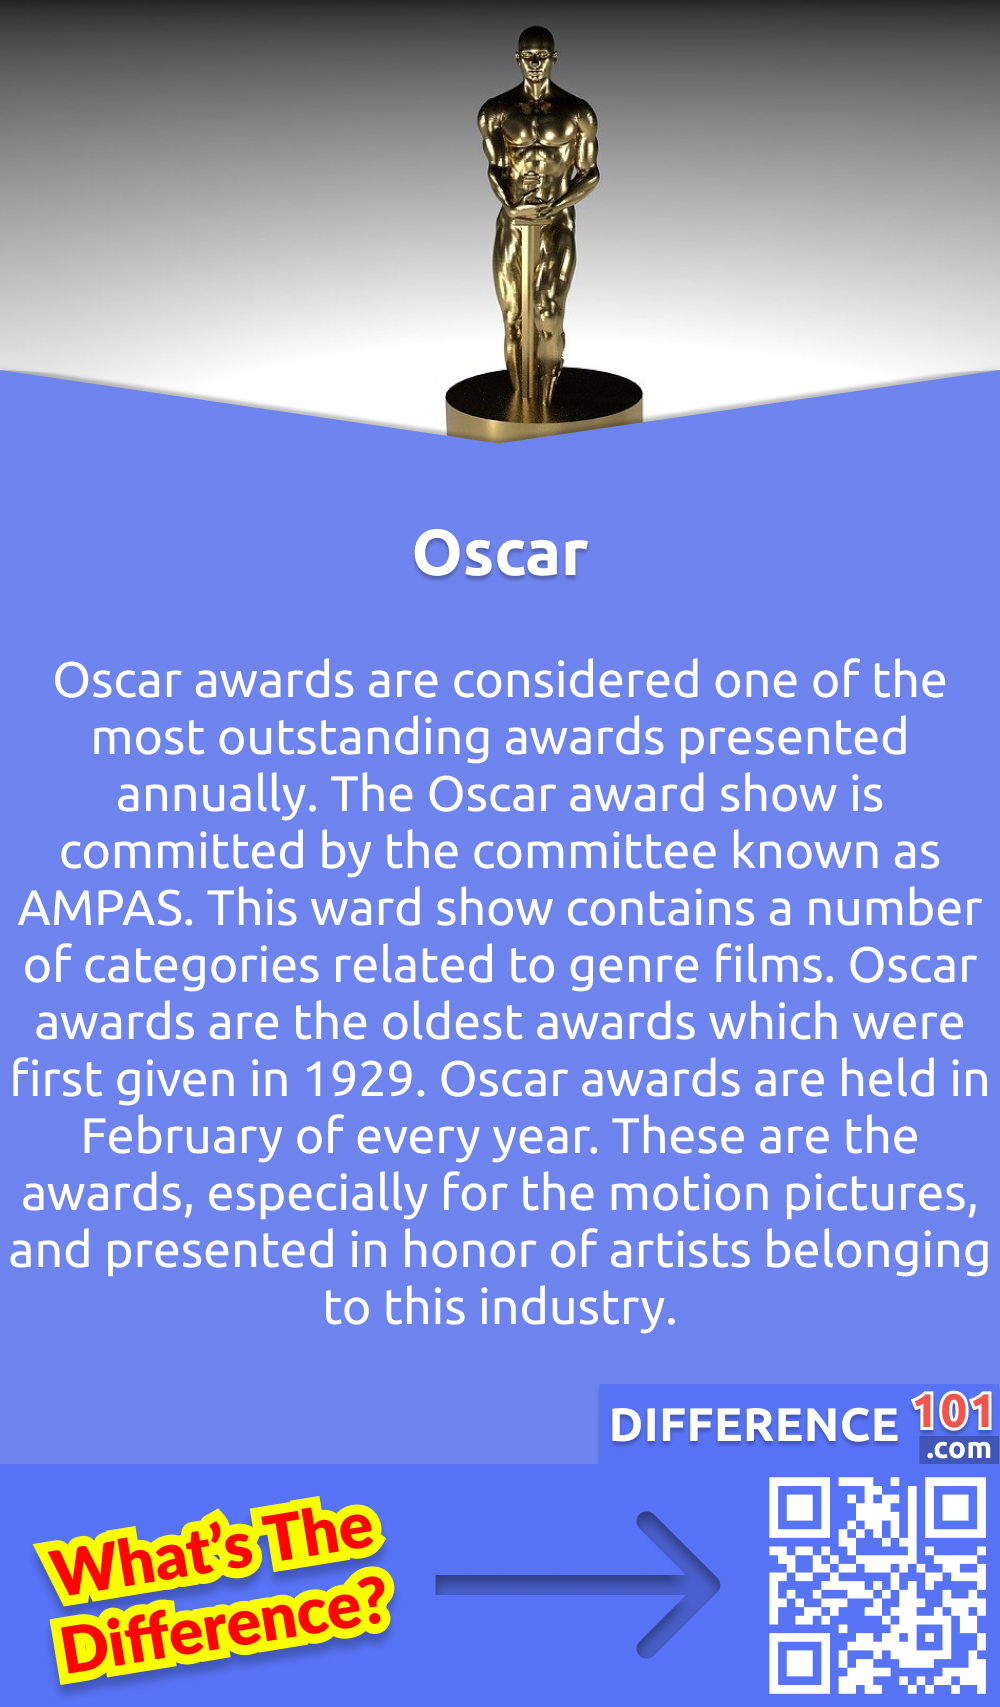 What is Oscar? Oscar awards are considered one of the most outstanding awards presented annually. The Oscar award show is committed by the committee known as AMPAS. This ward show contains a number of categories related to genre films. Oscar awards are the oldest awards which were first given in 1929. Oscar awards are held in February of every year. These are the awards, especially for the motion pictures, and presented in honor of artists belonging to this industry.